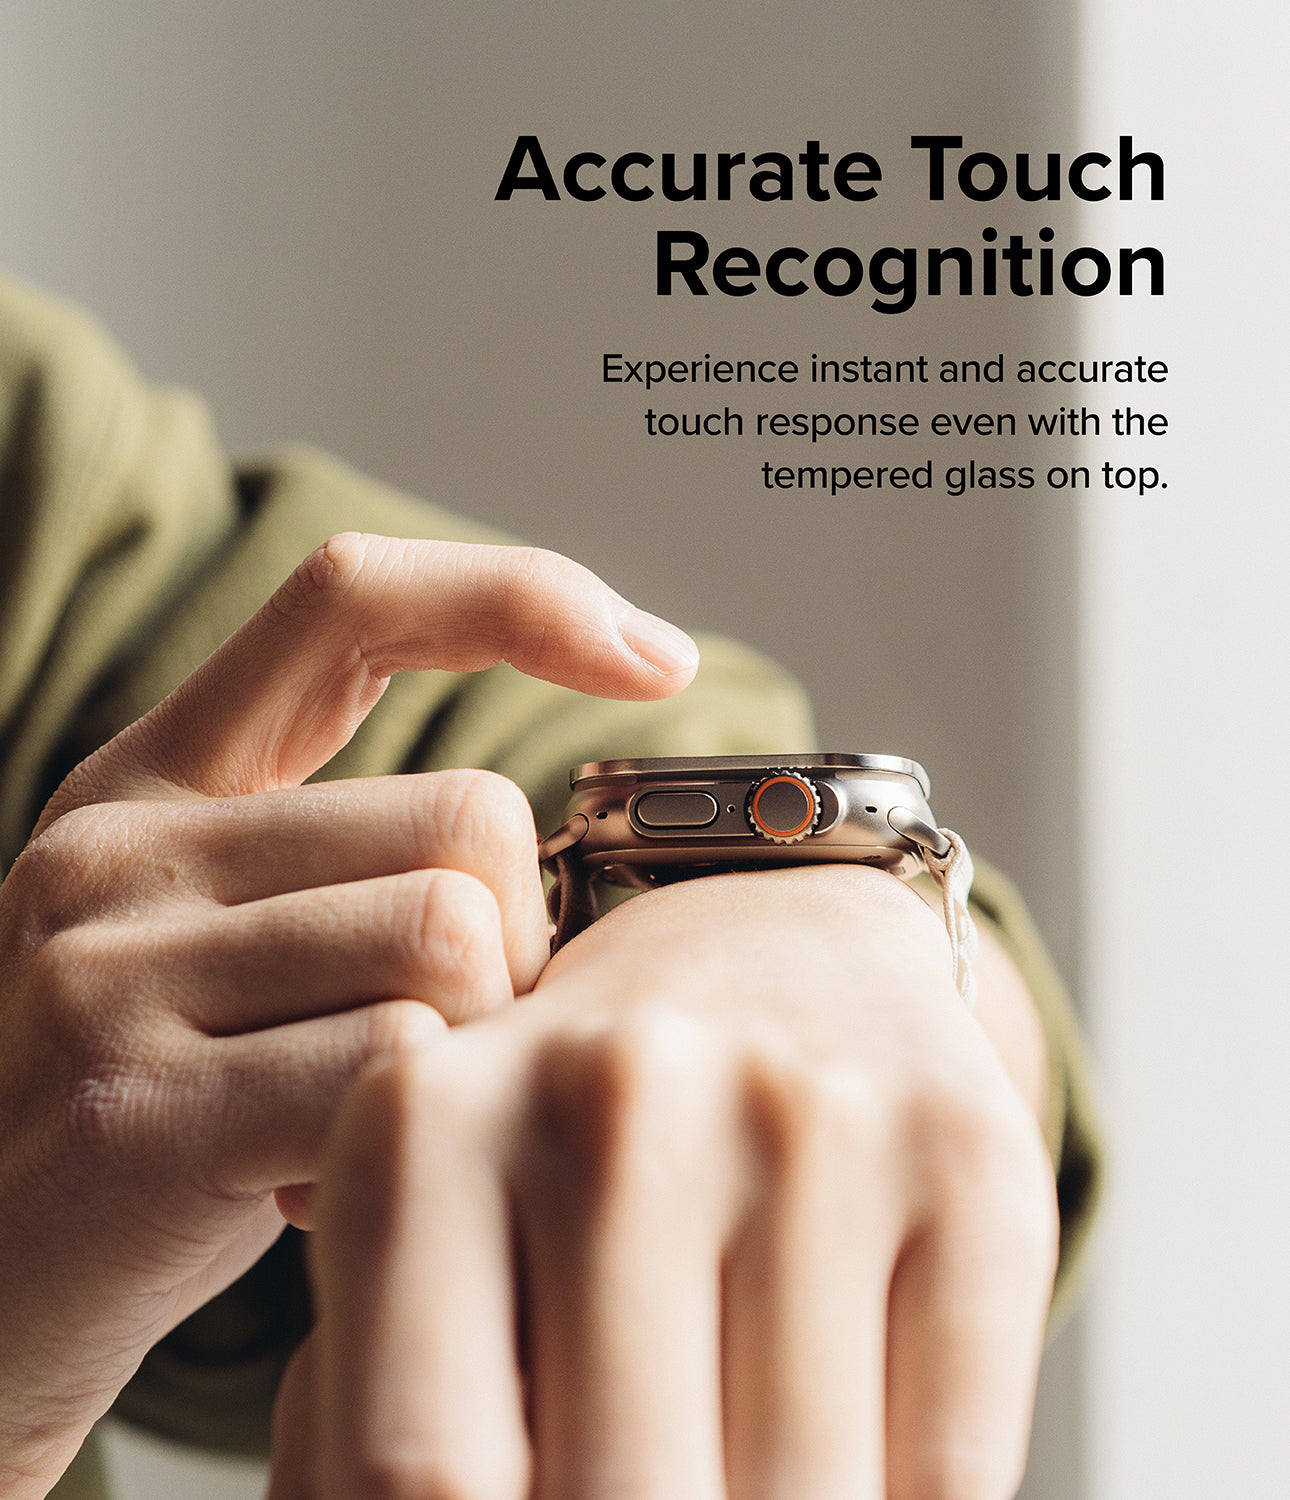 Accurate Touch Recognition - Experience instant and accurate touch response even with the tempered glass on top.